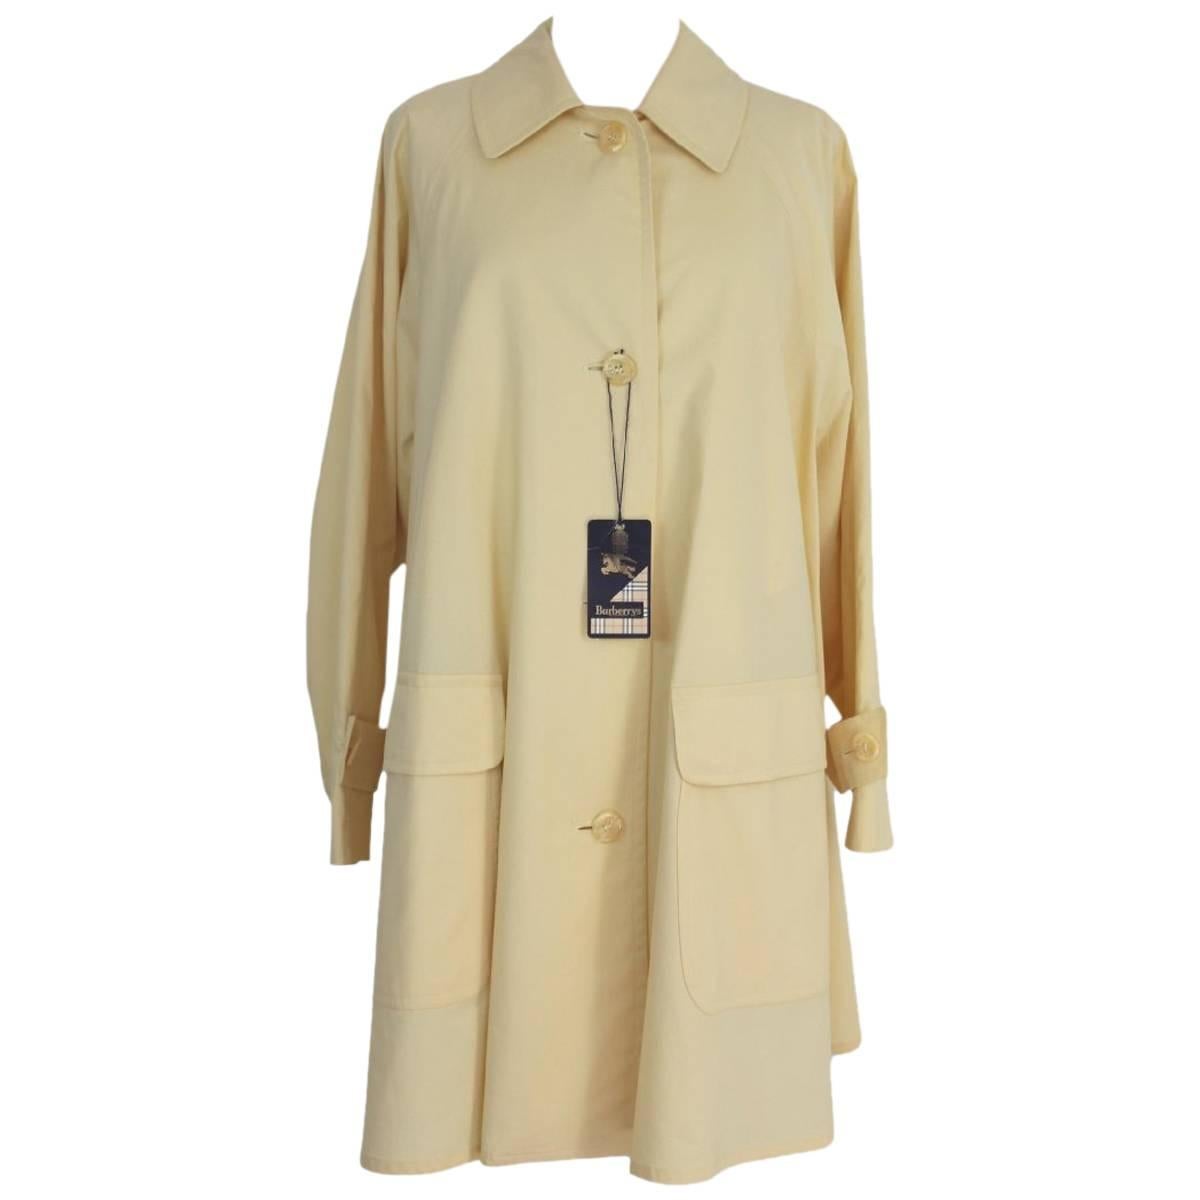 Burberry cotton beige waterproof coat woman’s size 12/R trench 1980s NWT For Sale